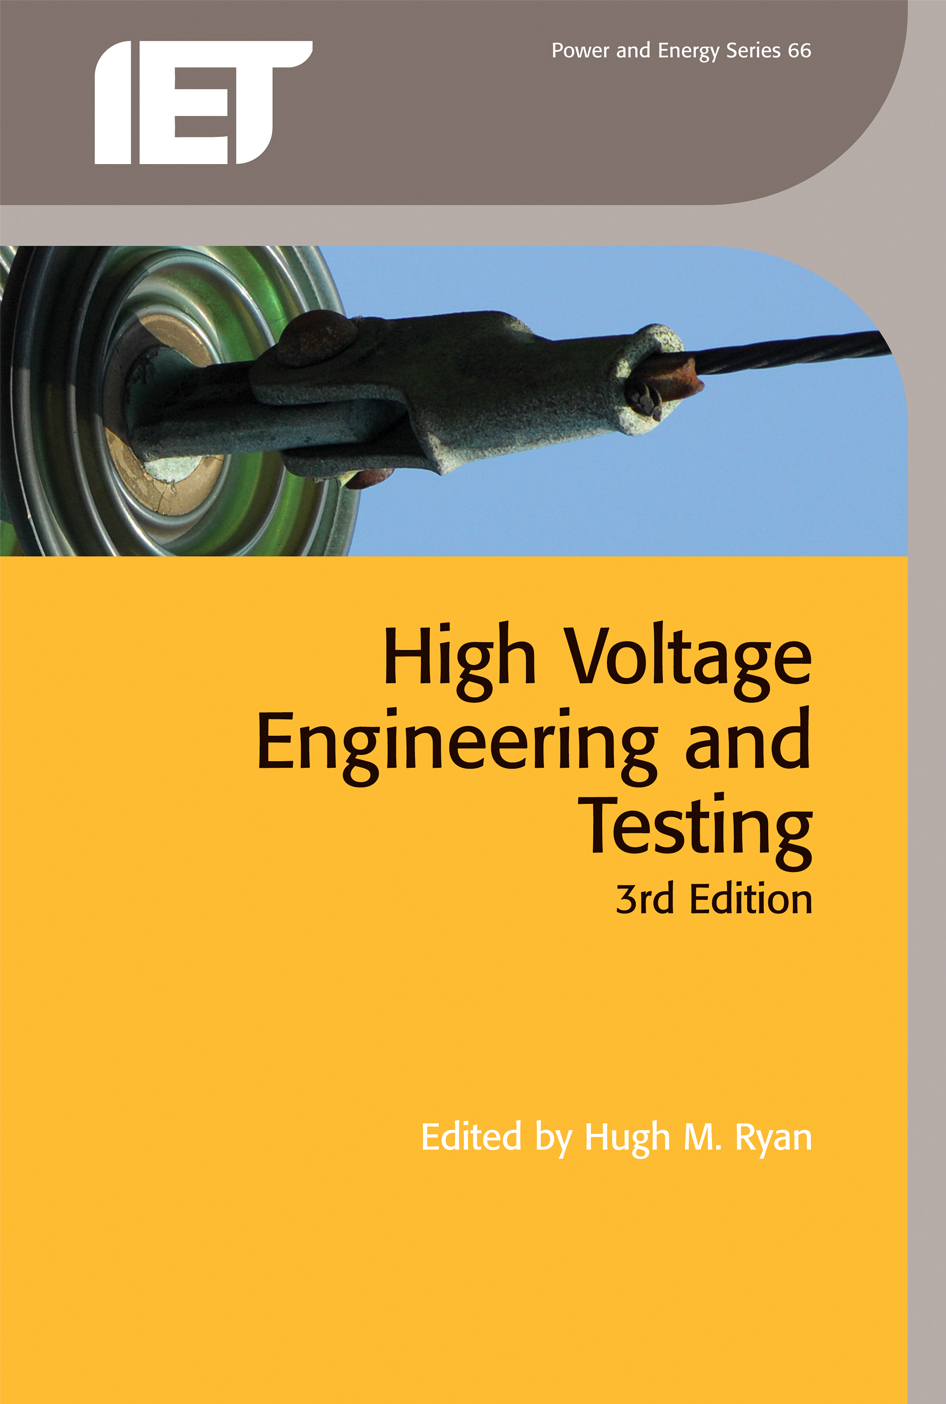 High-Voltage Engineering and Testing, 3rd Edition